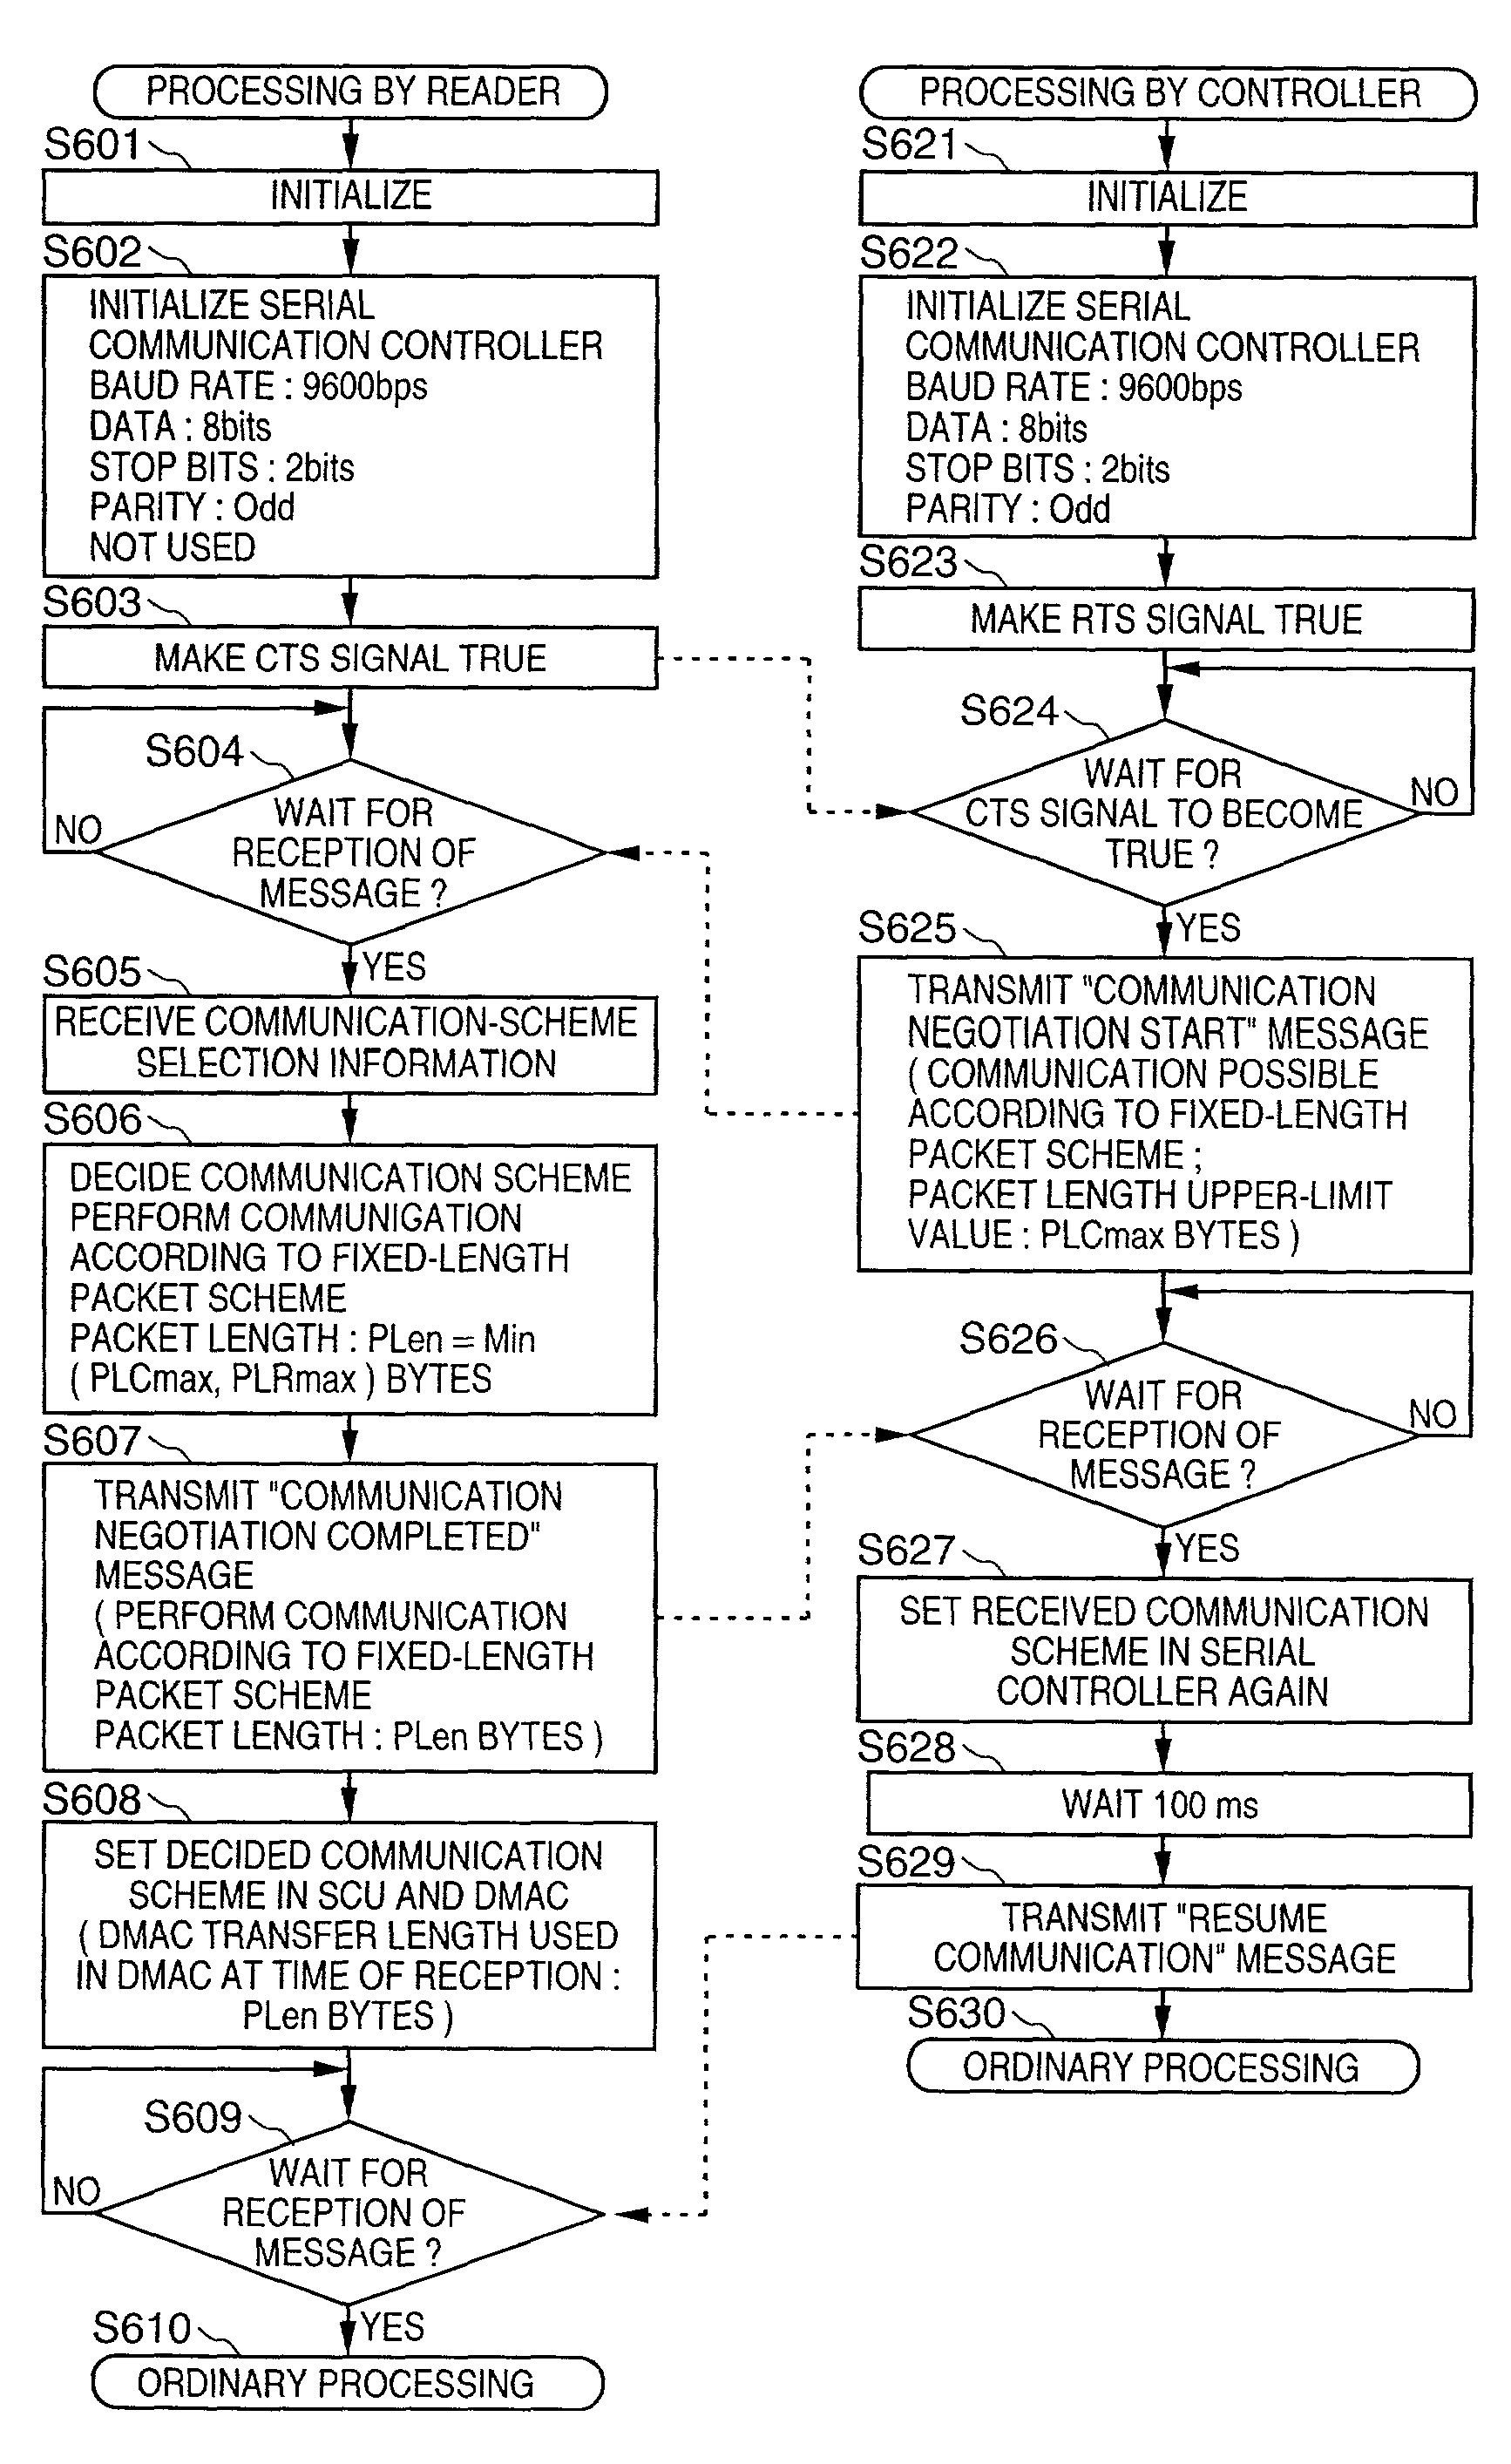 Controlling packet length for transfer between devices